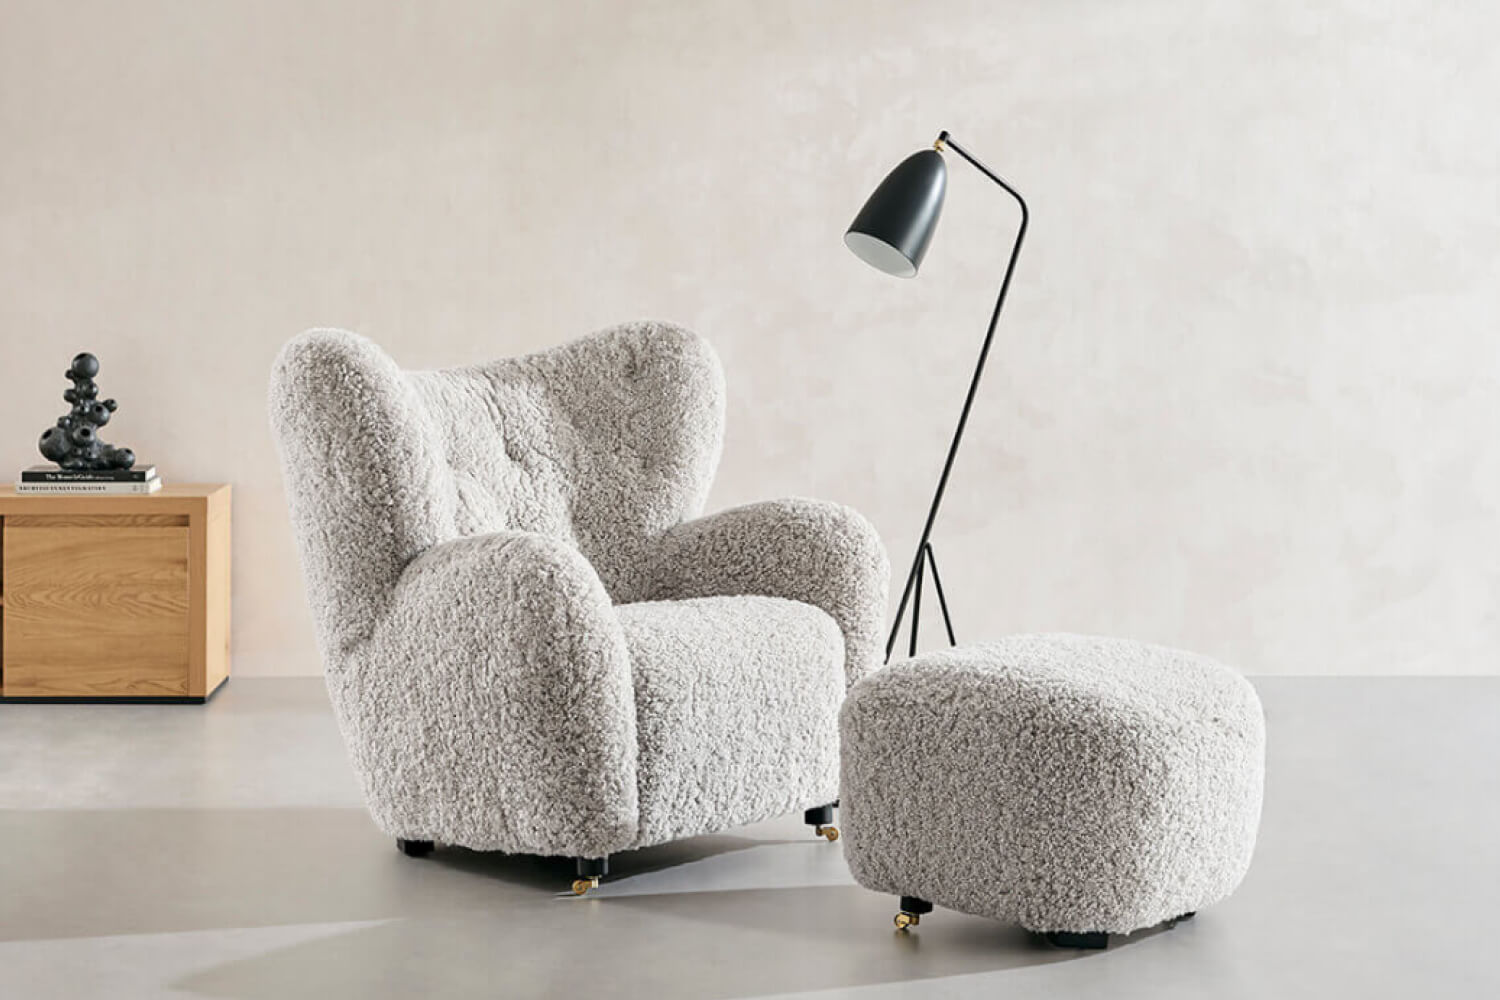 A cozy and inviting Flemming Lassen The Tired Man Lounge Chair and matching Footstool, both upholstered in genuine sheepskin, offer a luxurious seating experience. Positioned next to a sleek floor lamp and a wooden side table with a decorative sculpture.